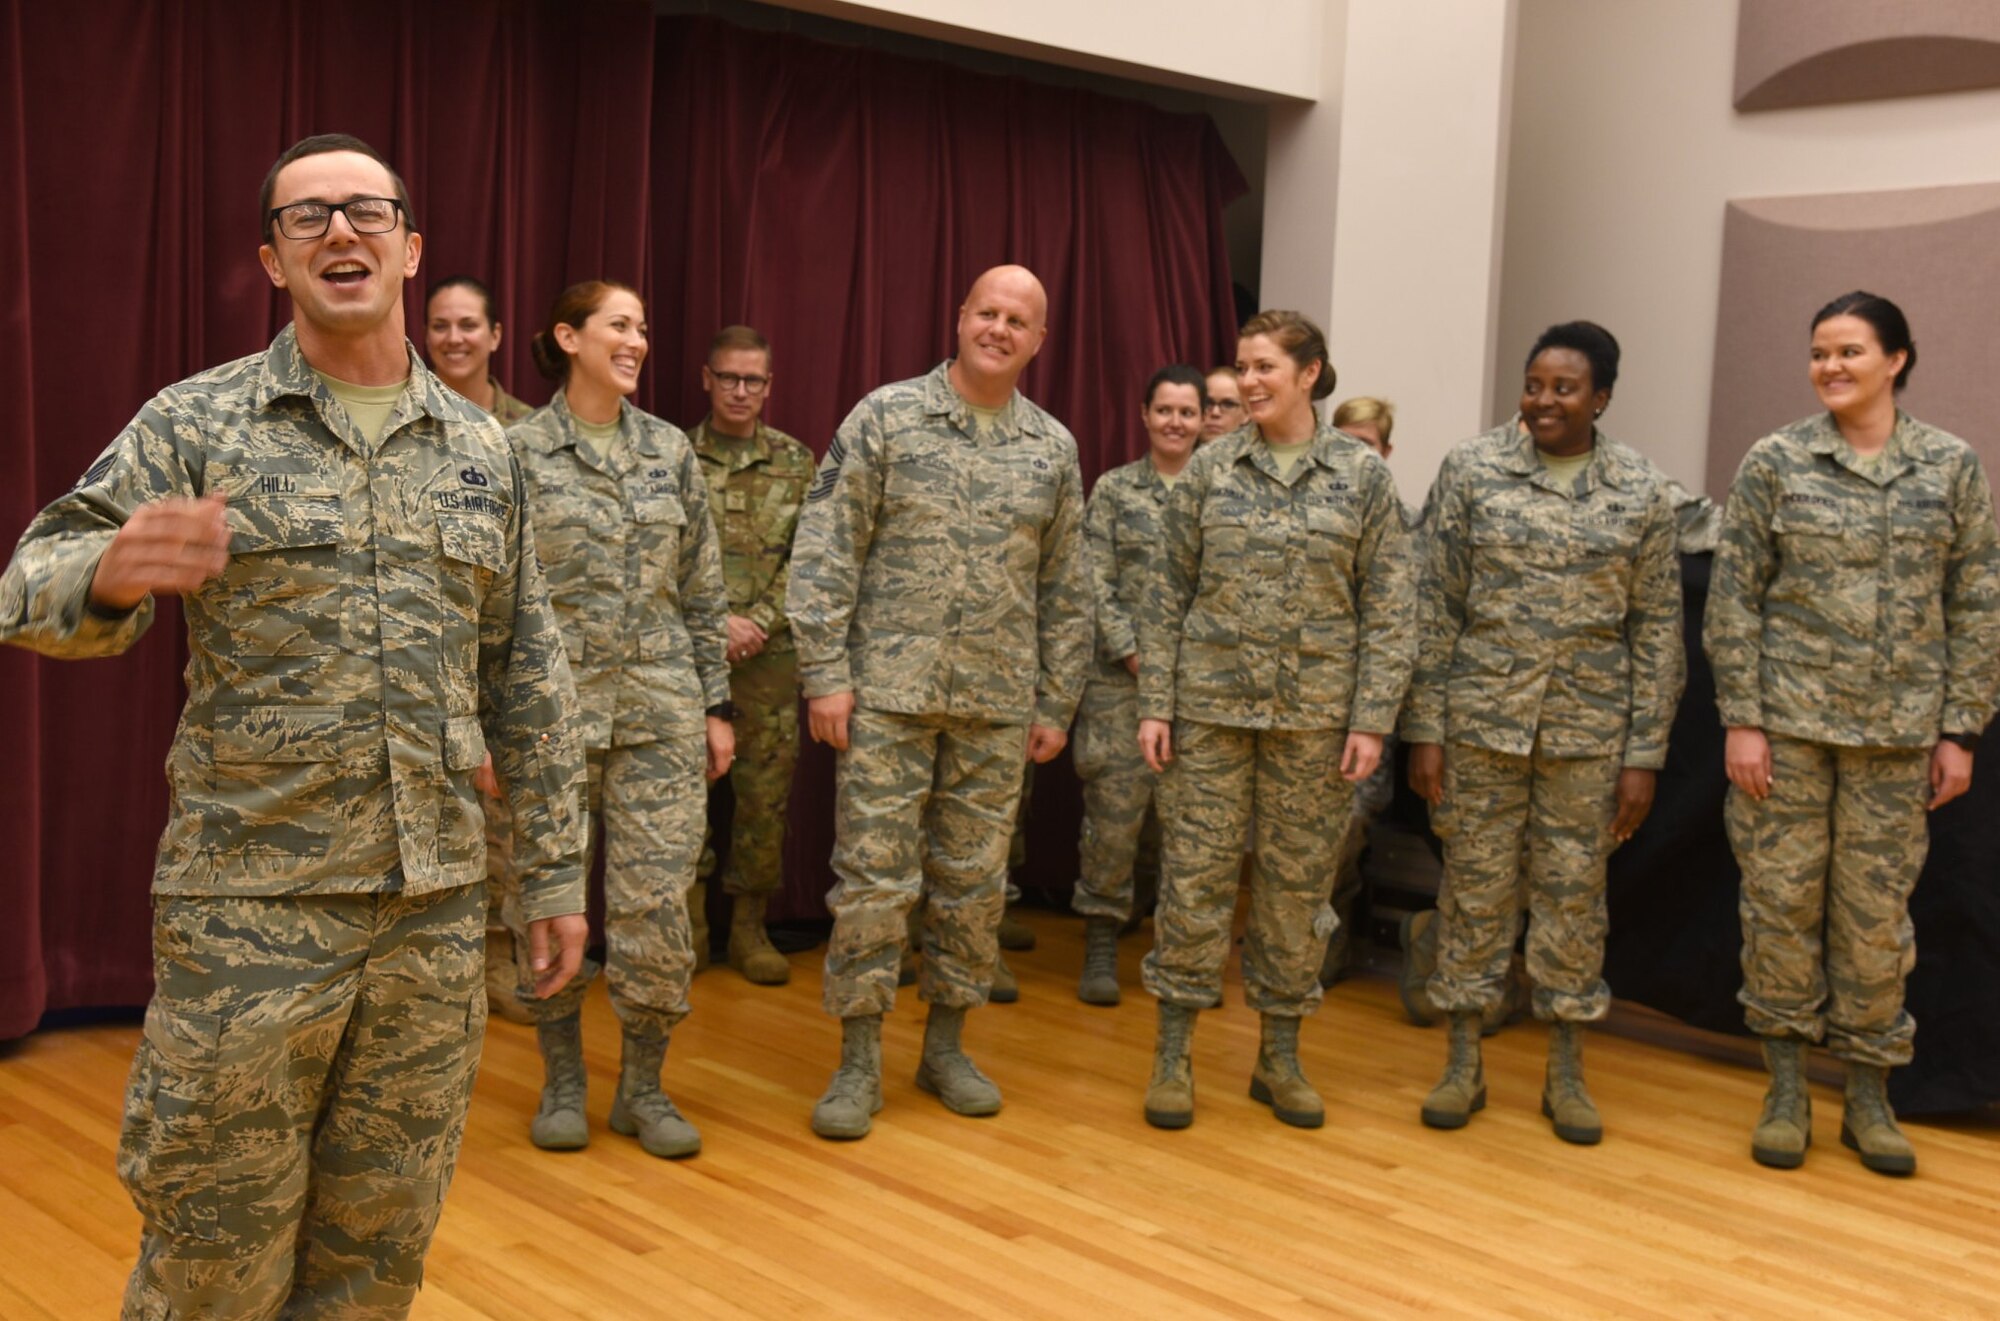 Members of the U.S. Air Force Band Singing Sergeants perform a song in Polish as part of the U.S. Air Force Honor Guard and Band immersion tour for Air Force District of Washington leadership Oct. 1.